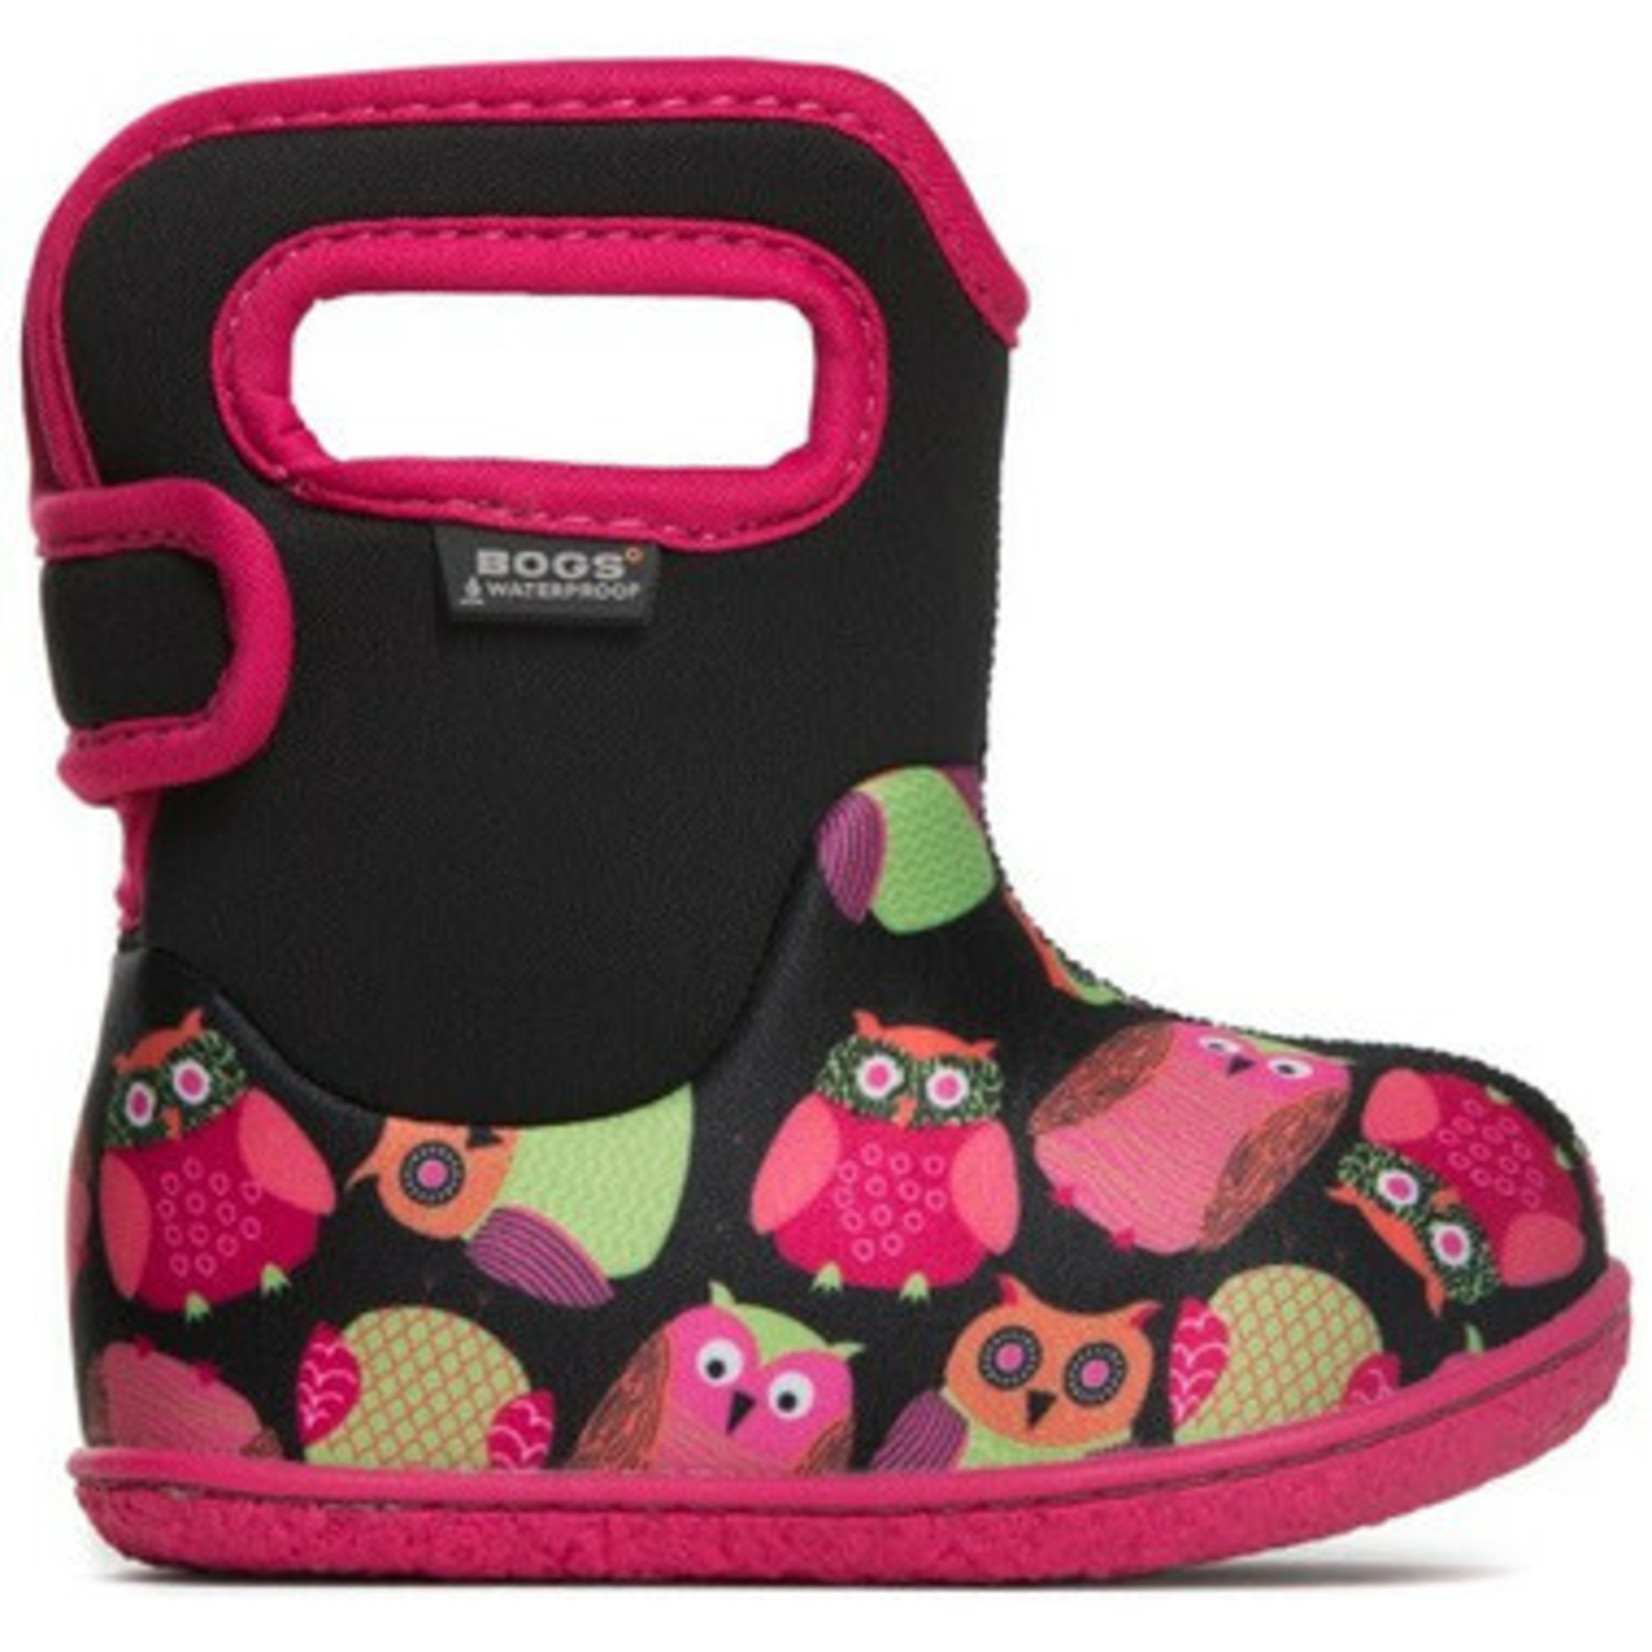 BOGS BOGS - Insulated fall/spring rainboots 'Baby Bogs - Owls / Black Multi'